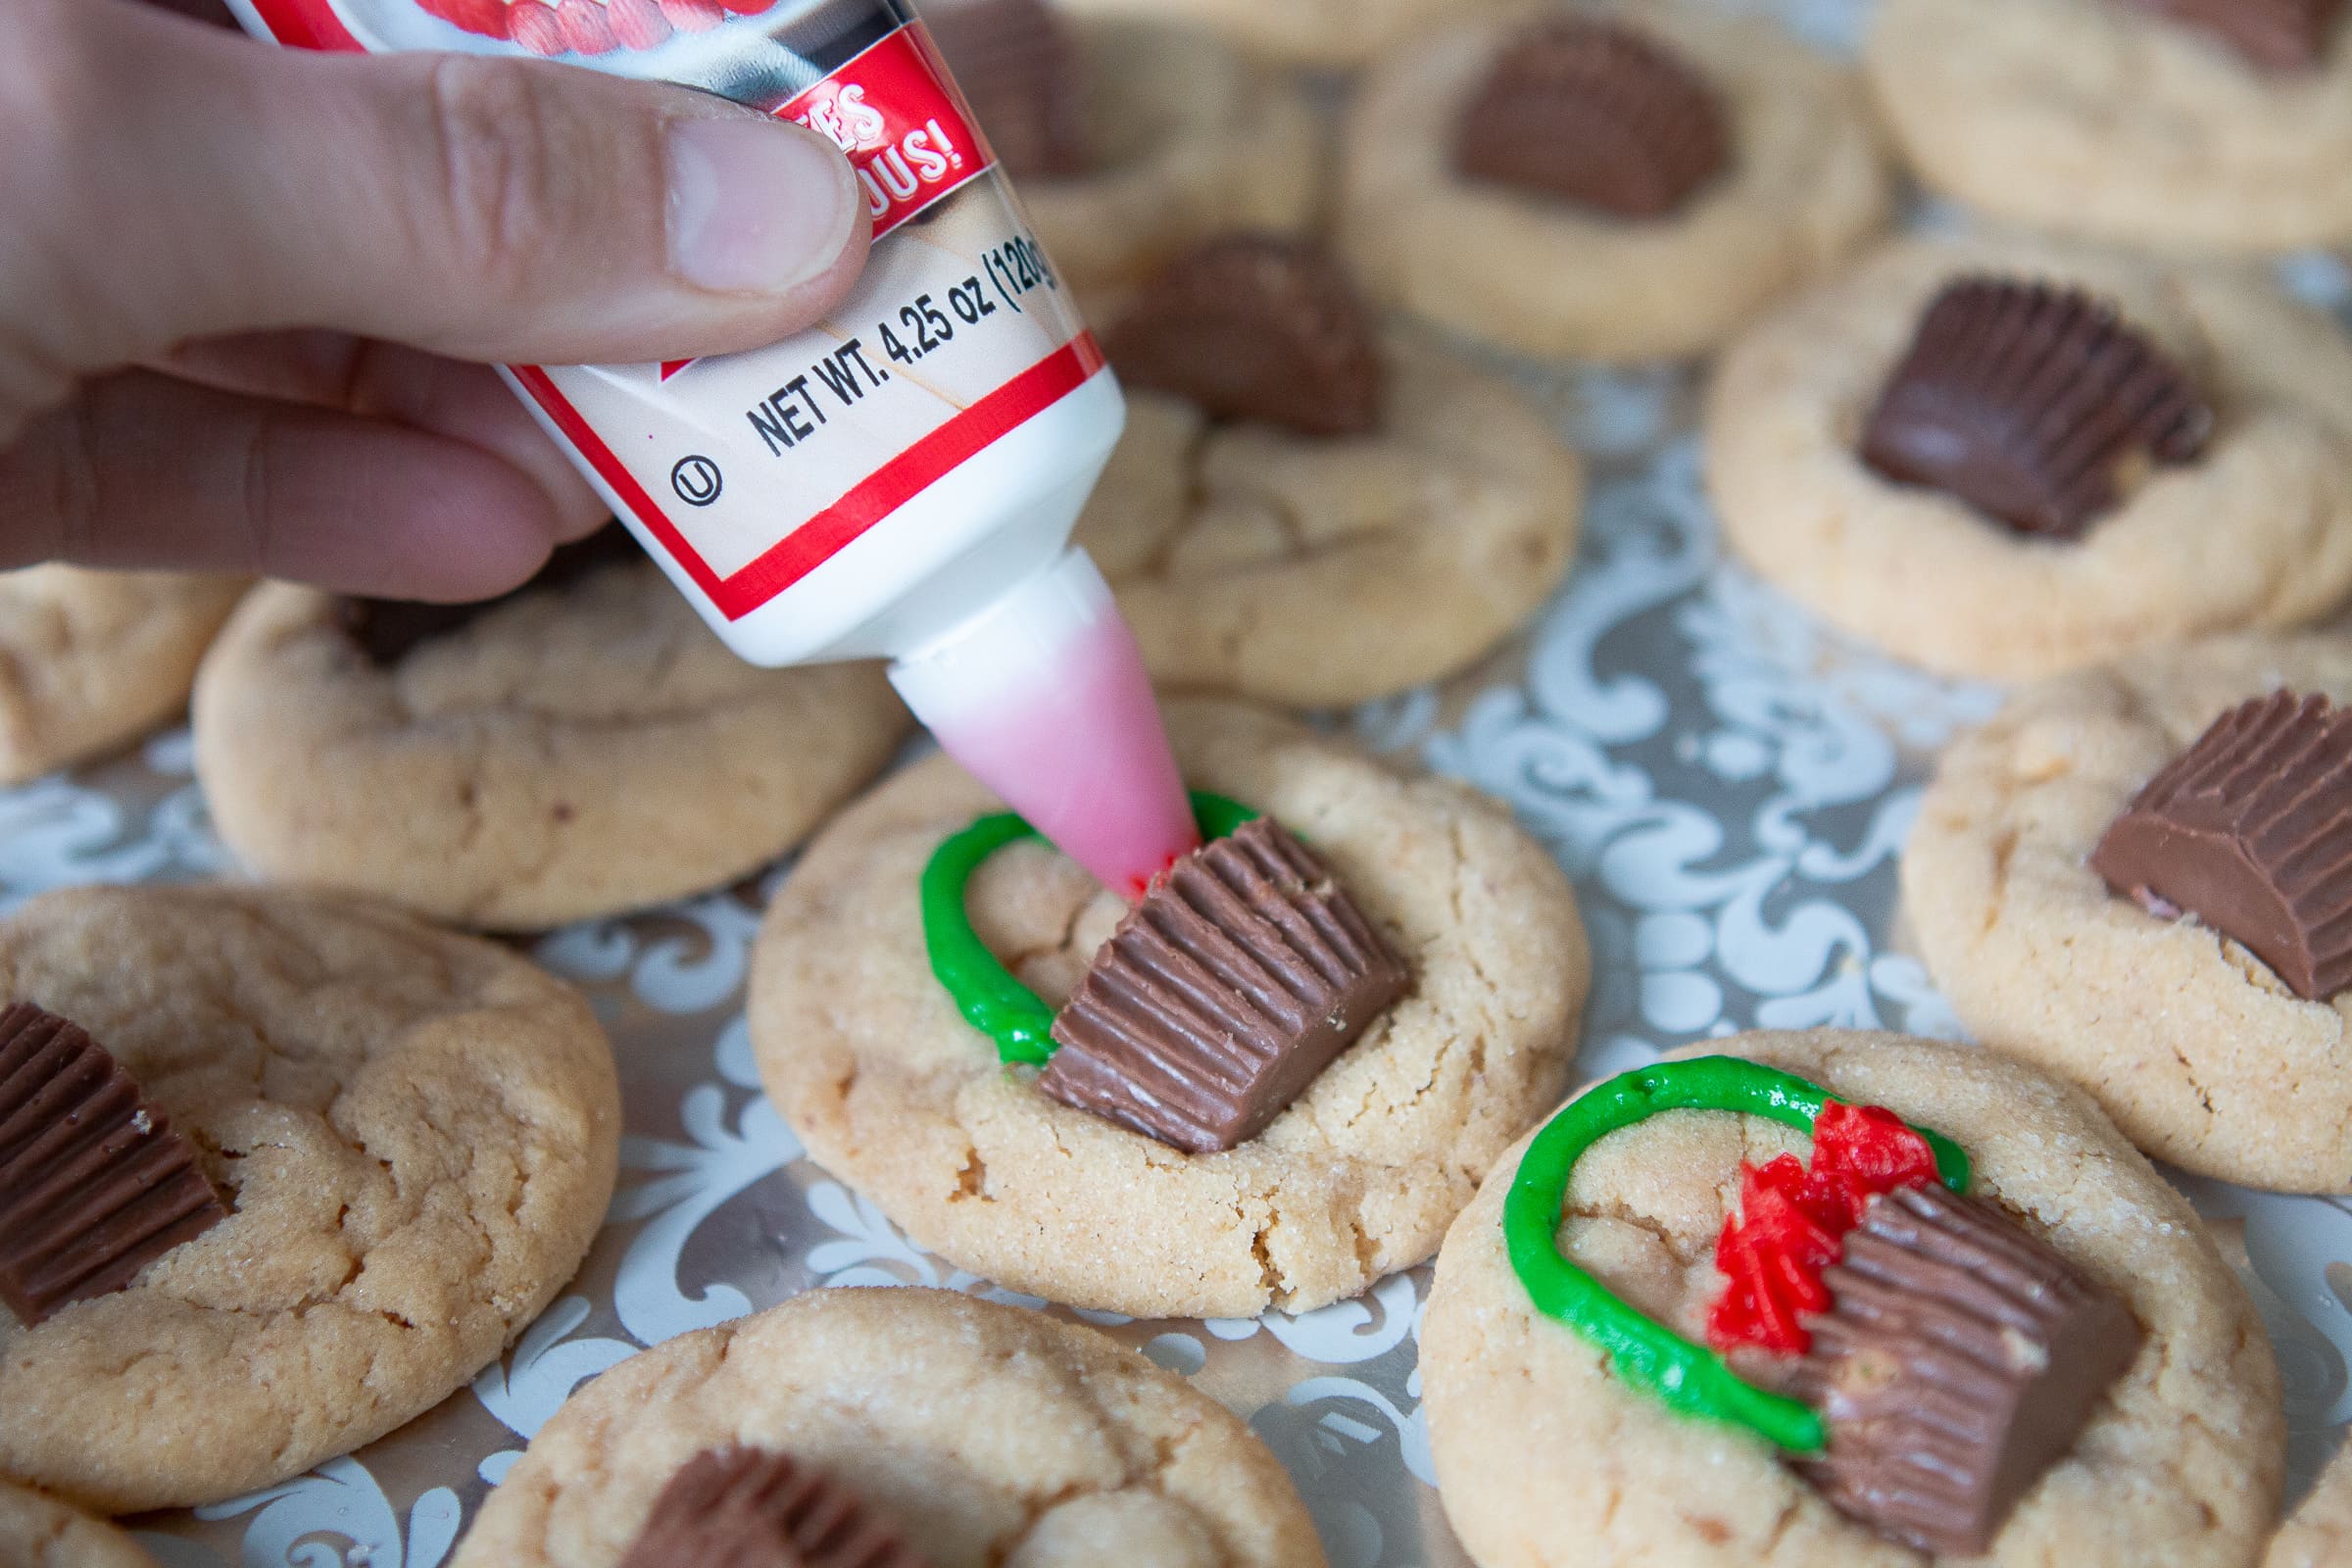 Adding red frosting to our peanut butter Christmas cookies